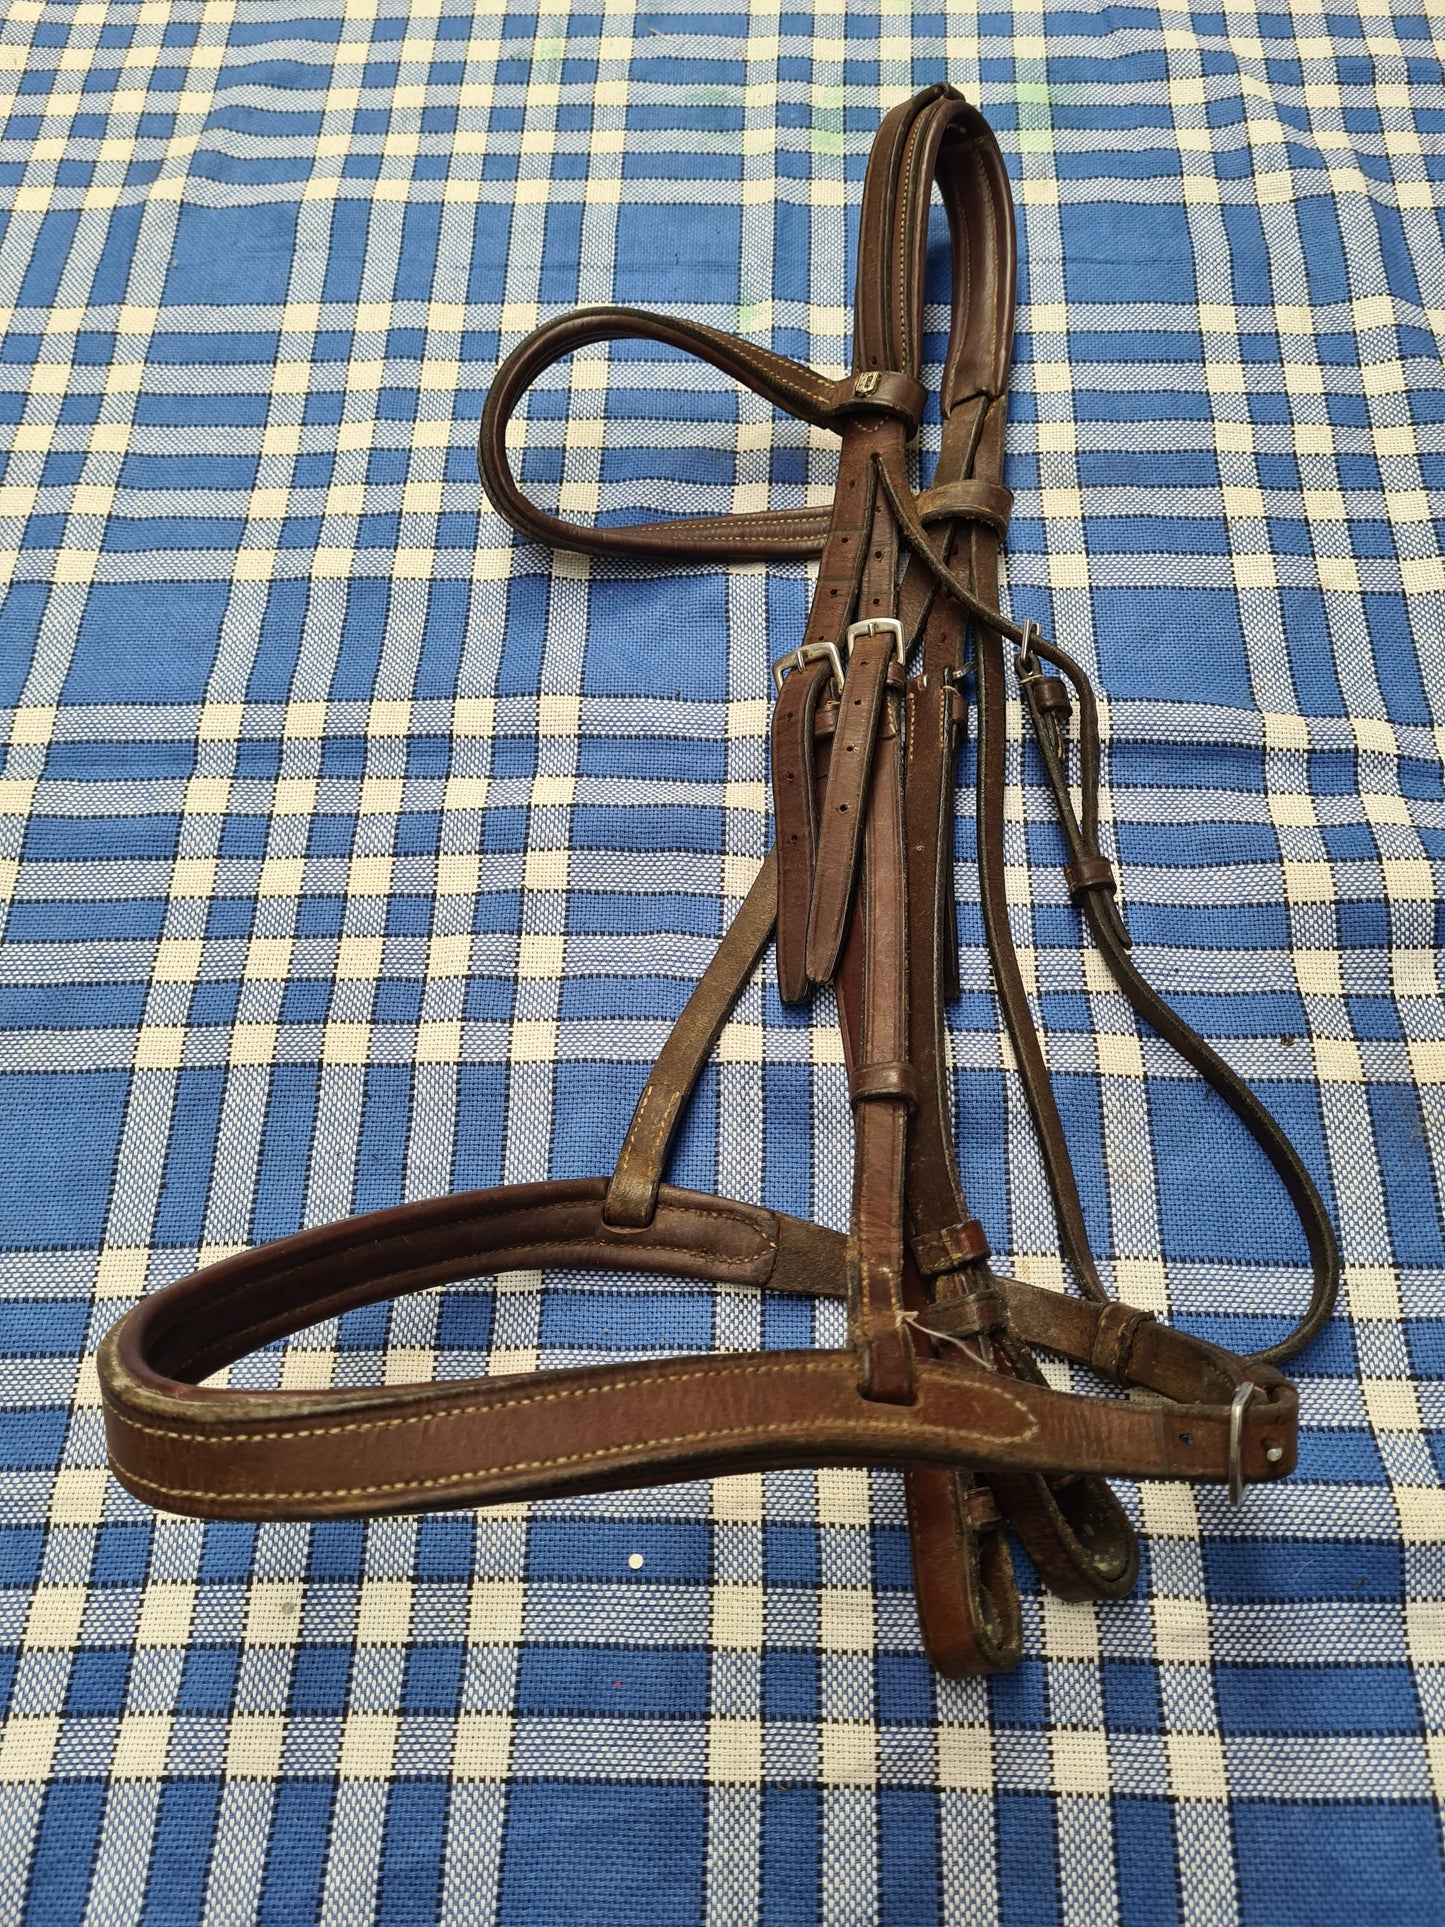 Used brown leather full size bridle FREE POSTAGE❤️